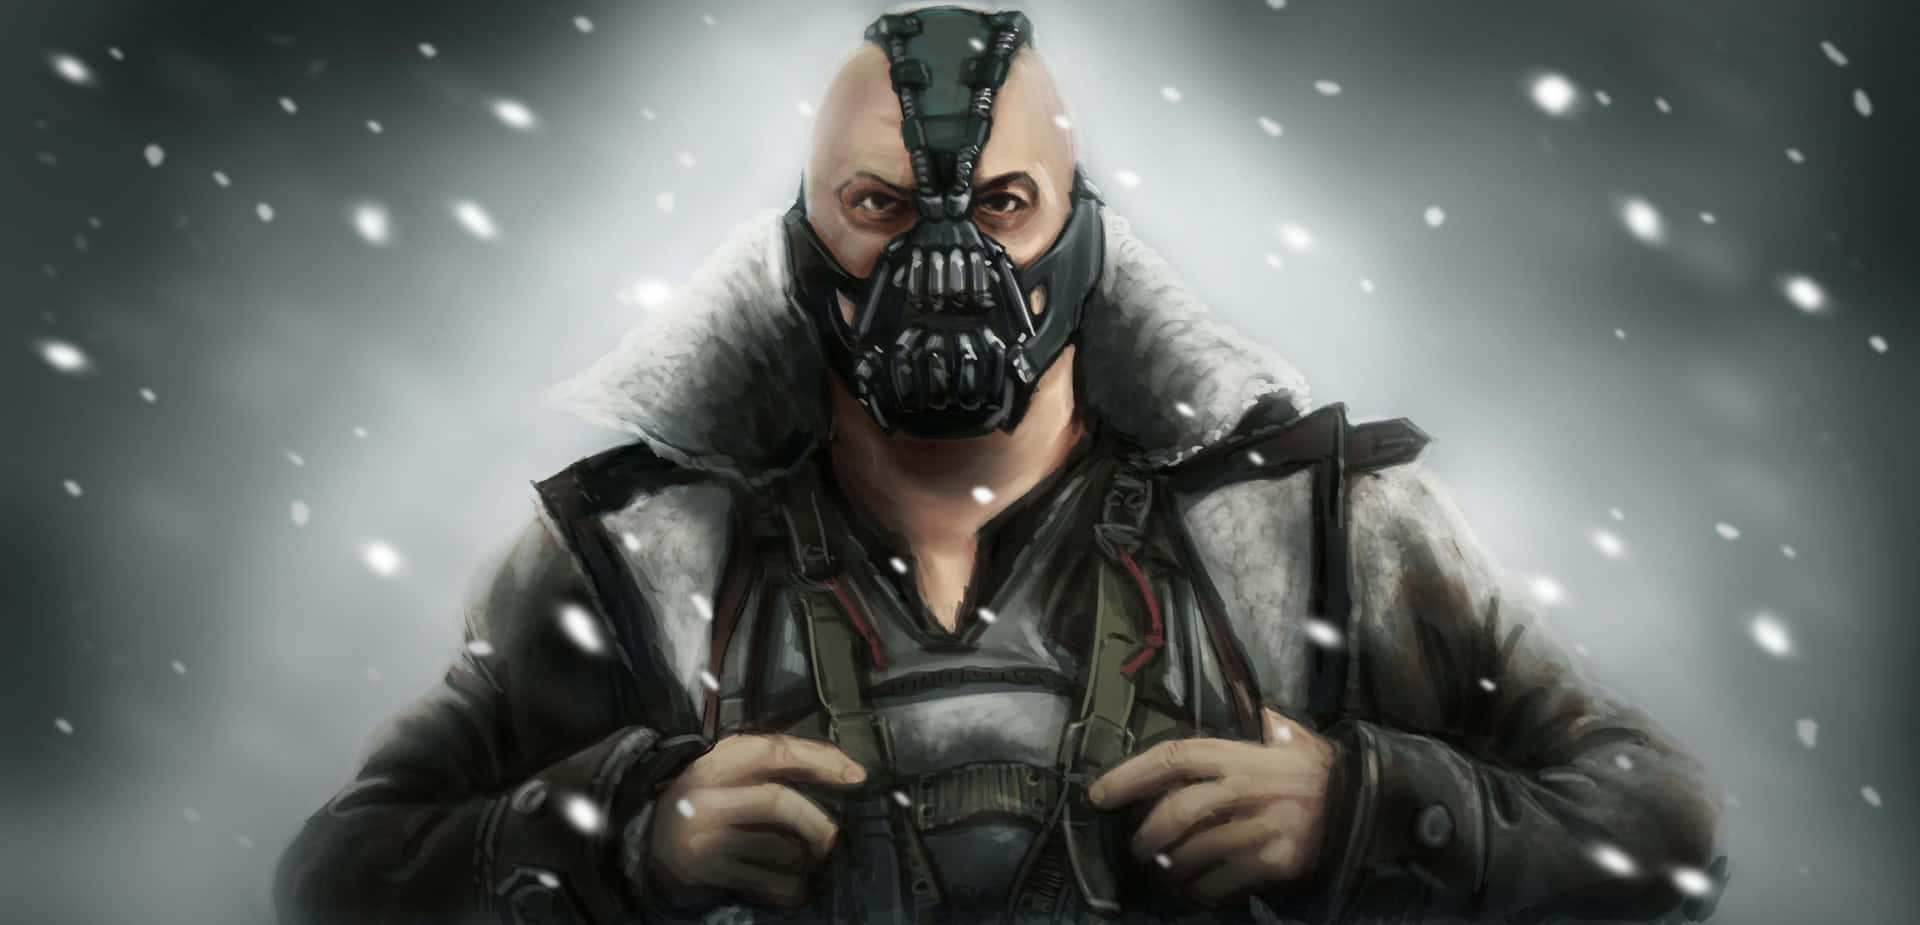 Don't Mess with Bane Wallpaper